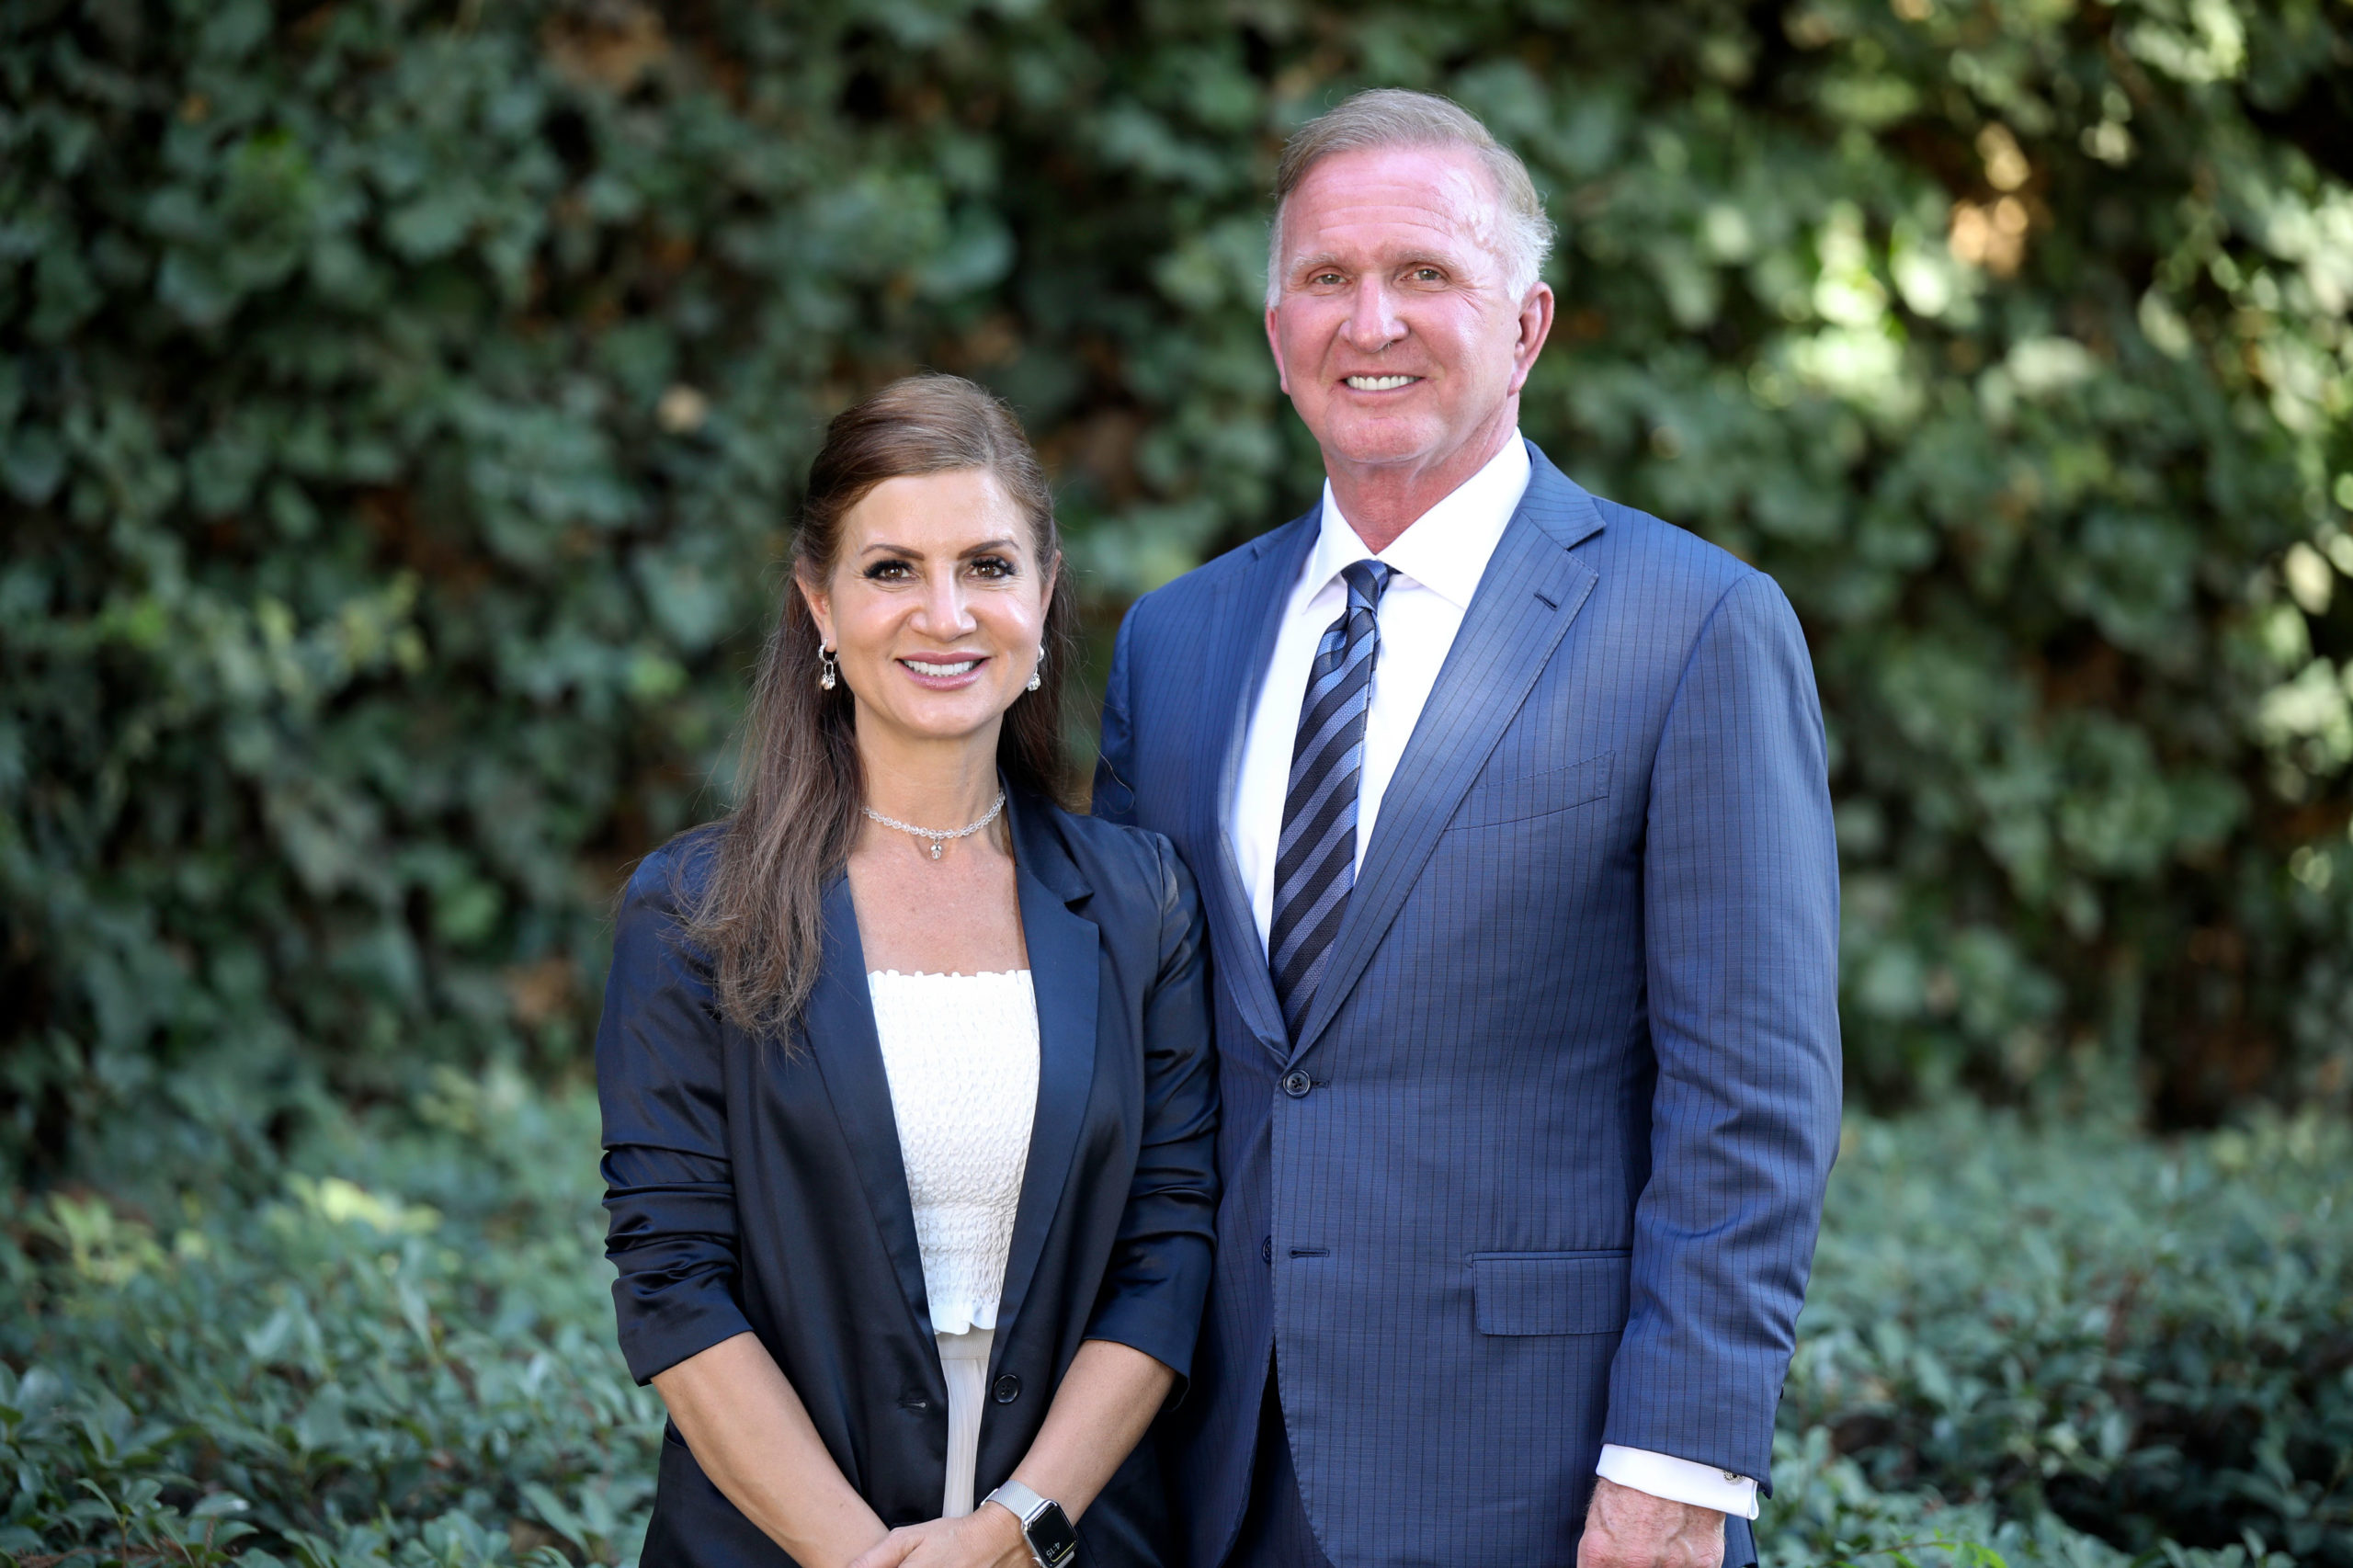 Robert and Tracy Eglet Give Historic Gift to University of the Pacific McGeorge School of Law